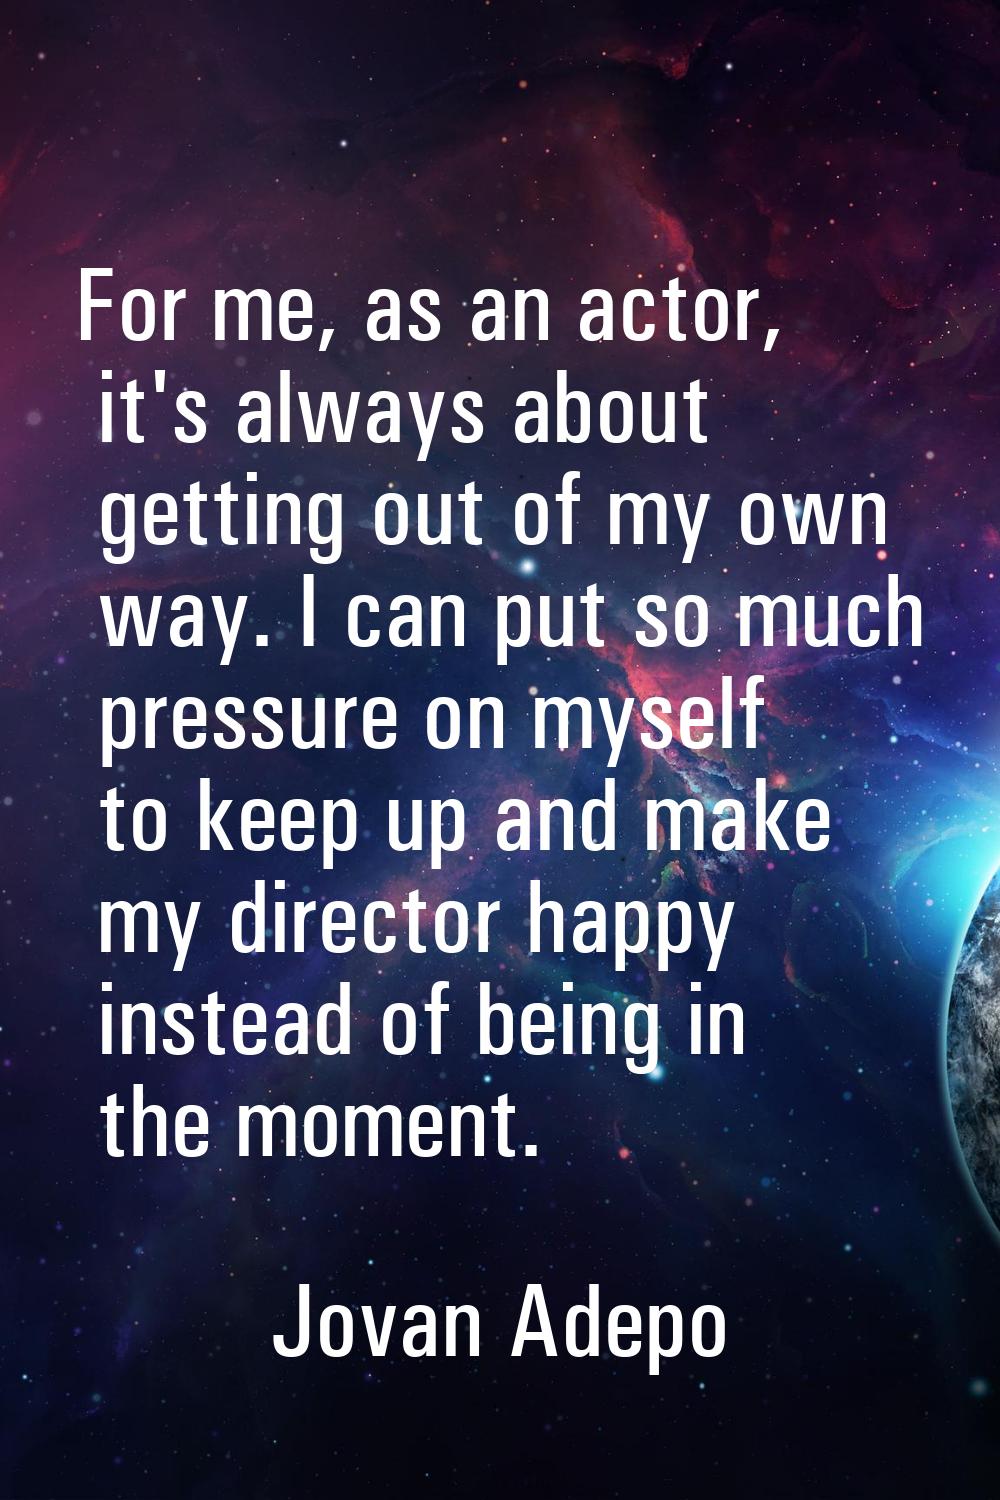 For me, as an actor, it's always about getting out of my own way. I can put so much pressure on mys